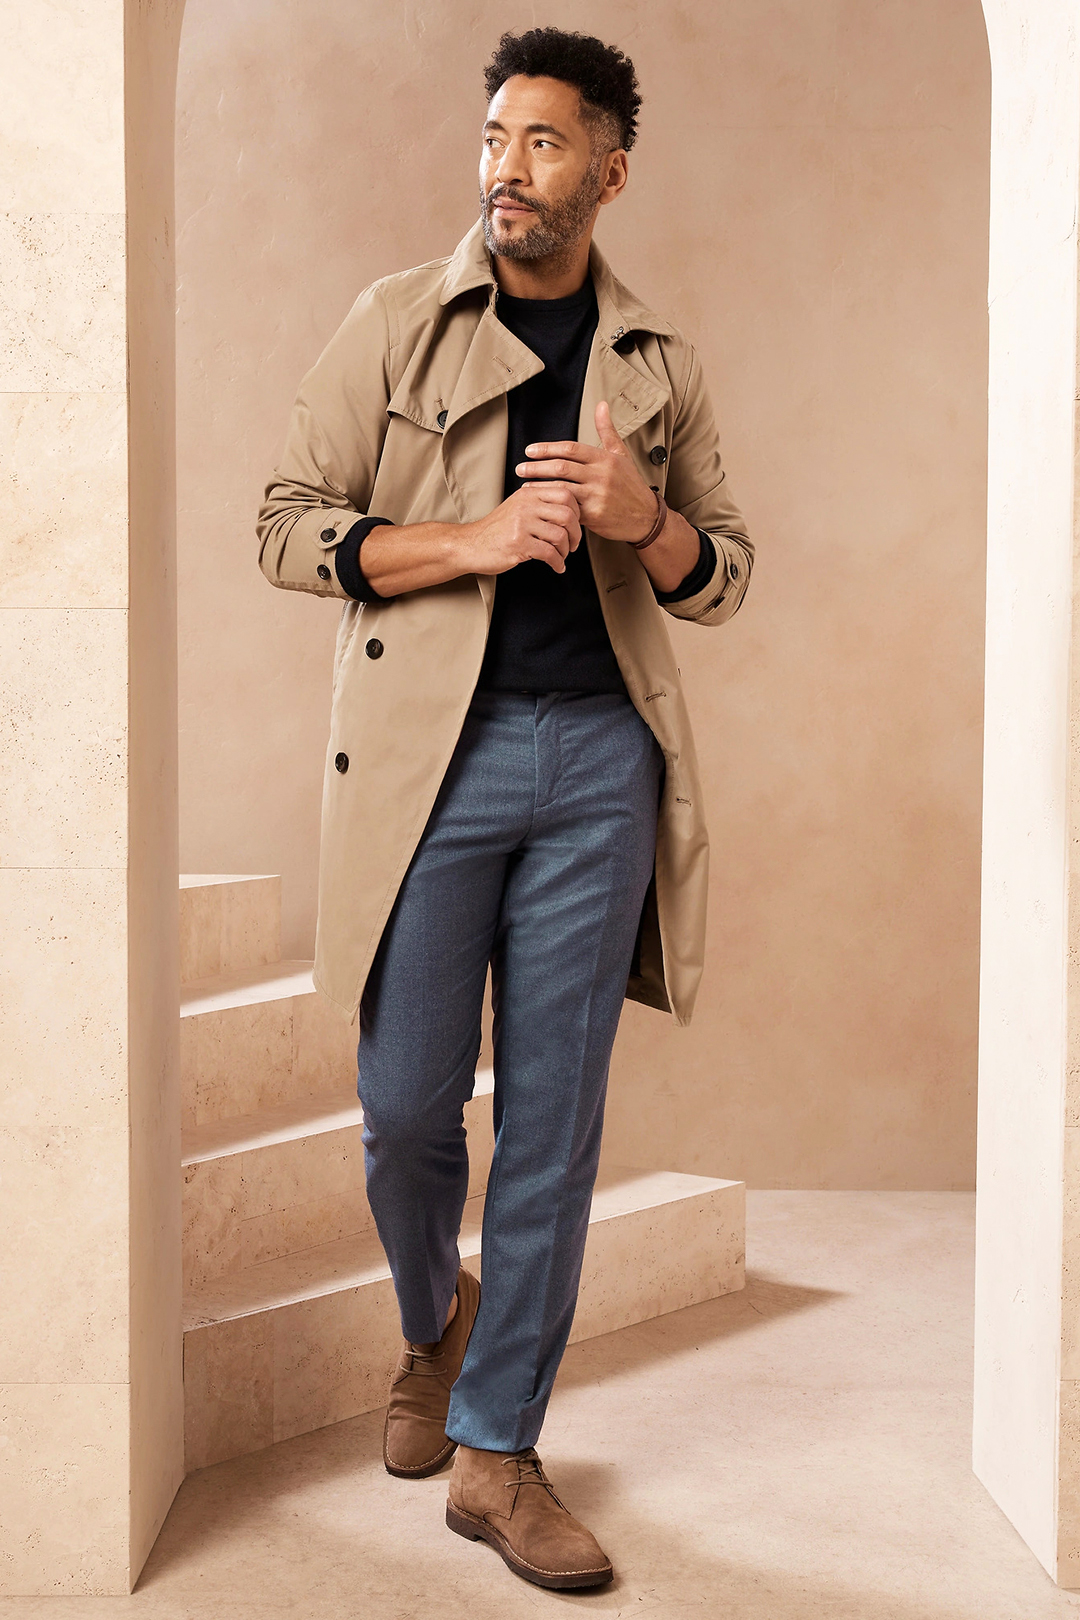 Tan trench coat, black crew neck sweater, blue dress pants, and light brown chukka boots outfit